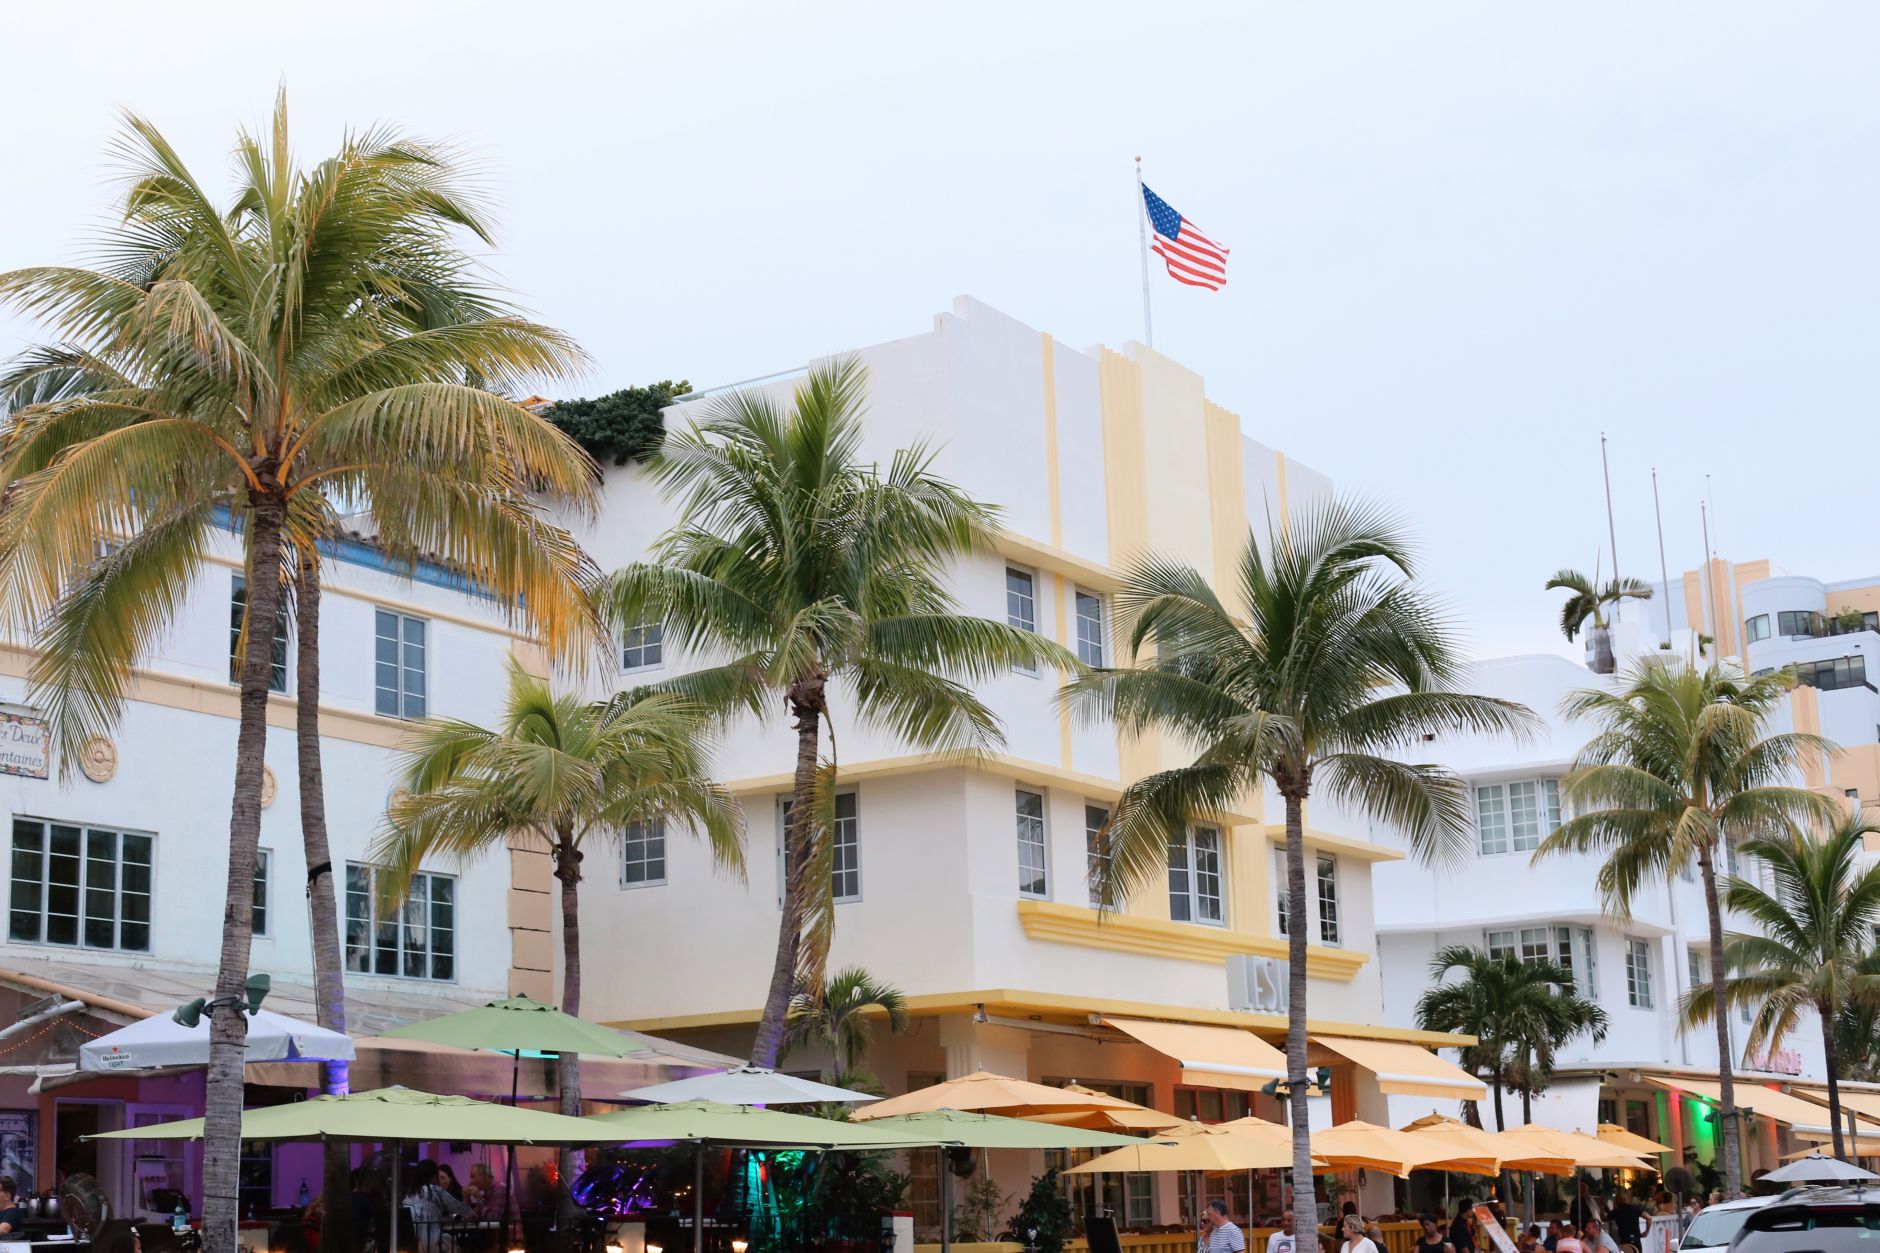 POST-PANDEMIC TRAVEL GUIDE: WHAT TO SEE, WHERE TO EAT & DRINK IN MIAMI, FL